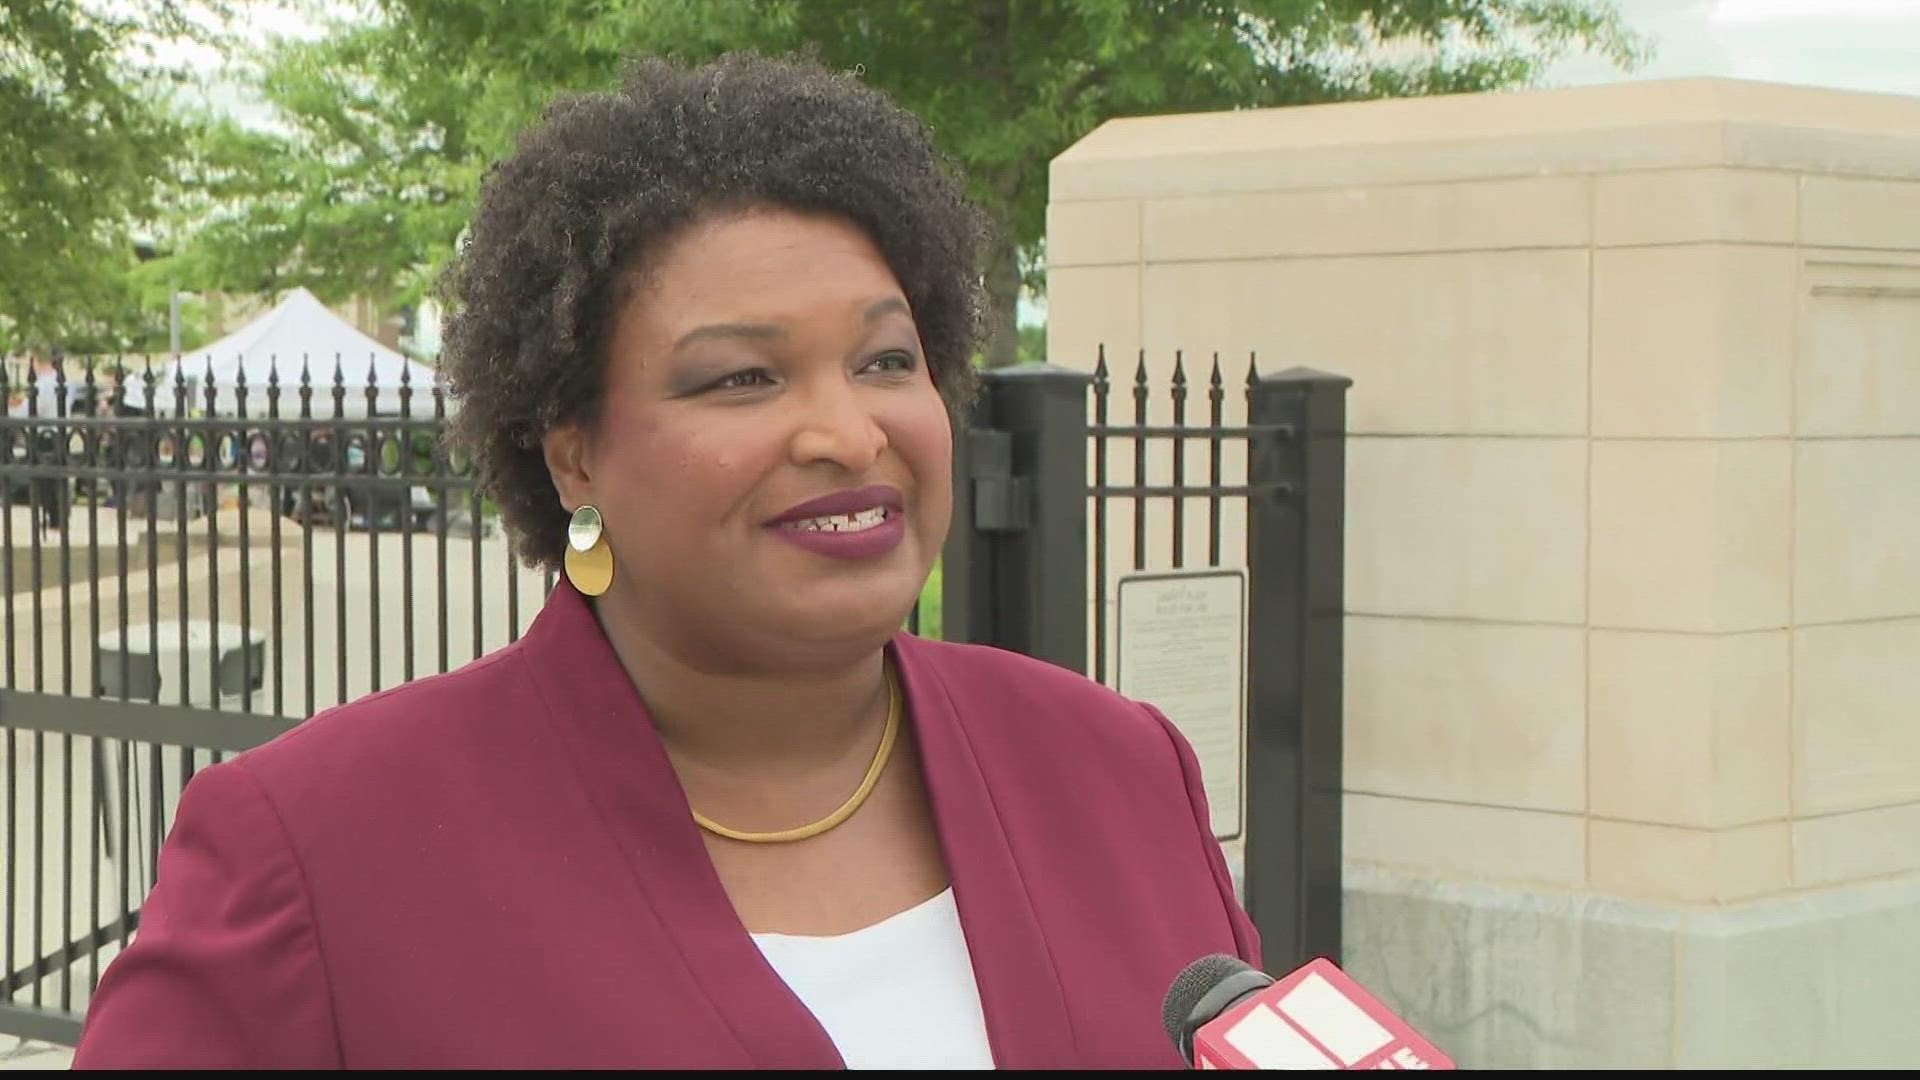 11Alive's Jon Shirek spoke to Stacey Abrams one-on-one at Liberty Plaza.